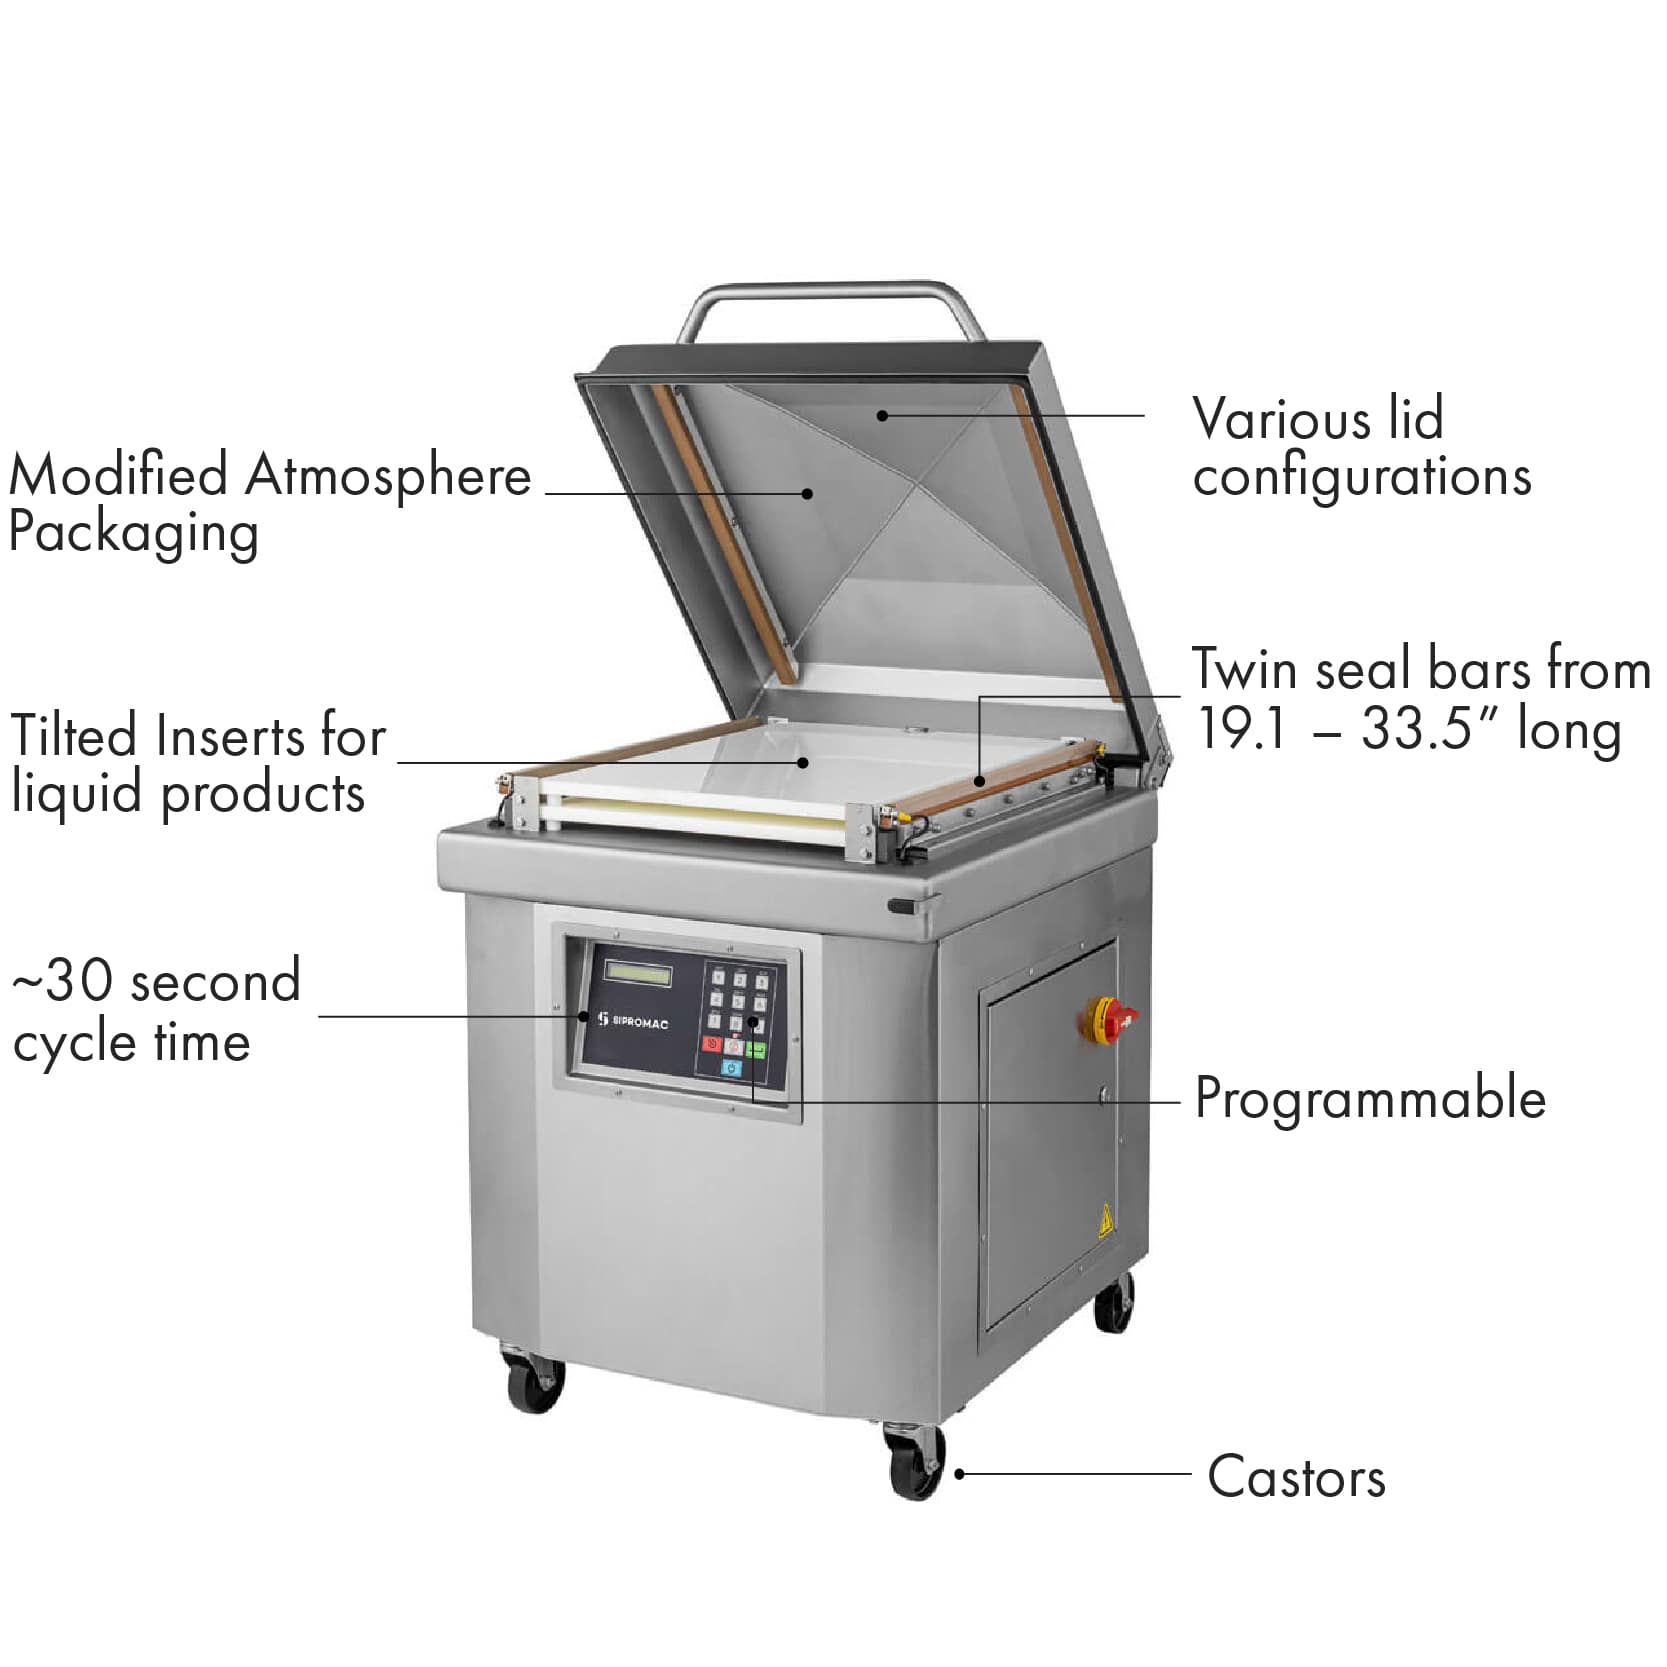 Single chamber vacuum sealer with features listed